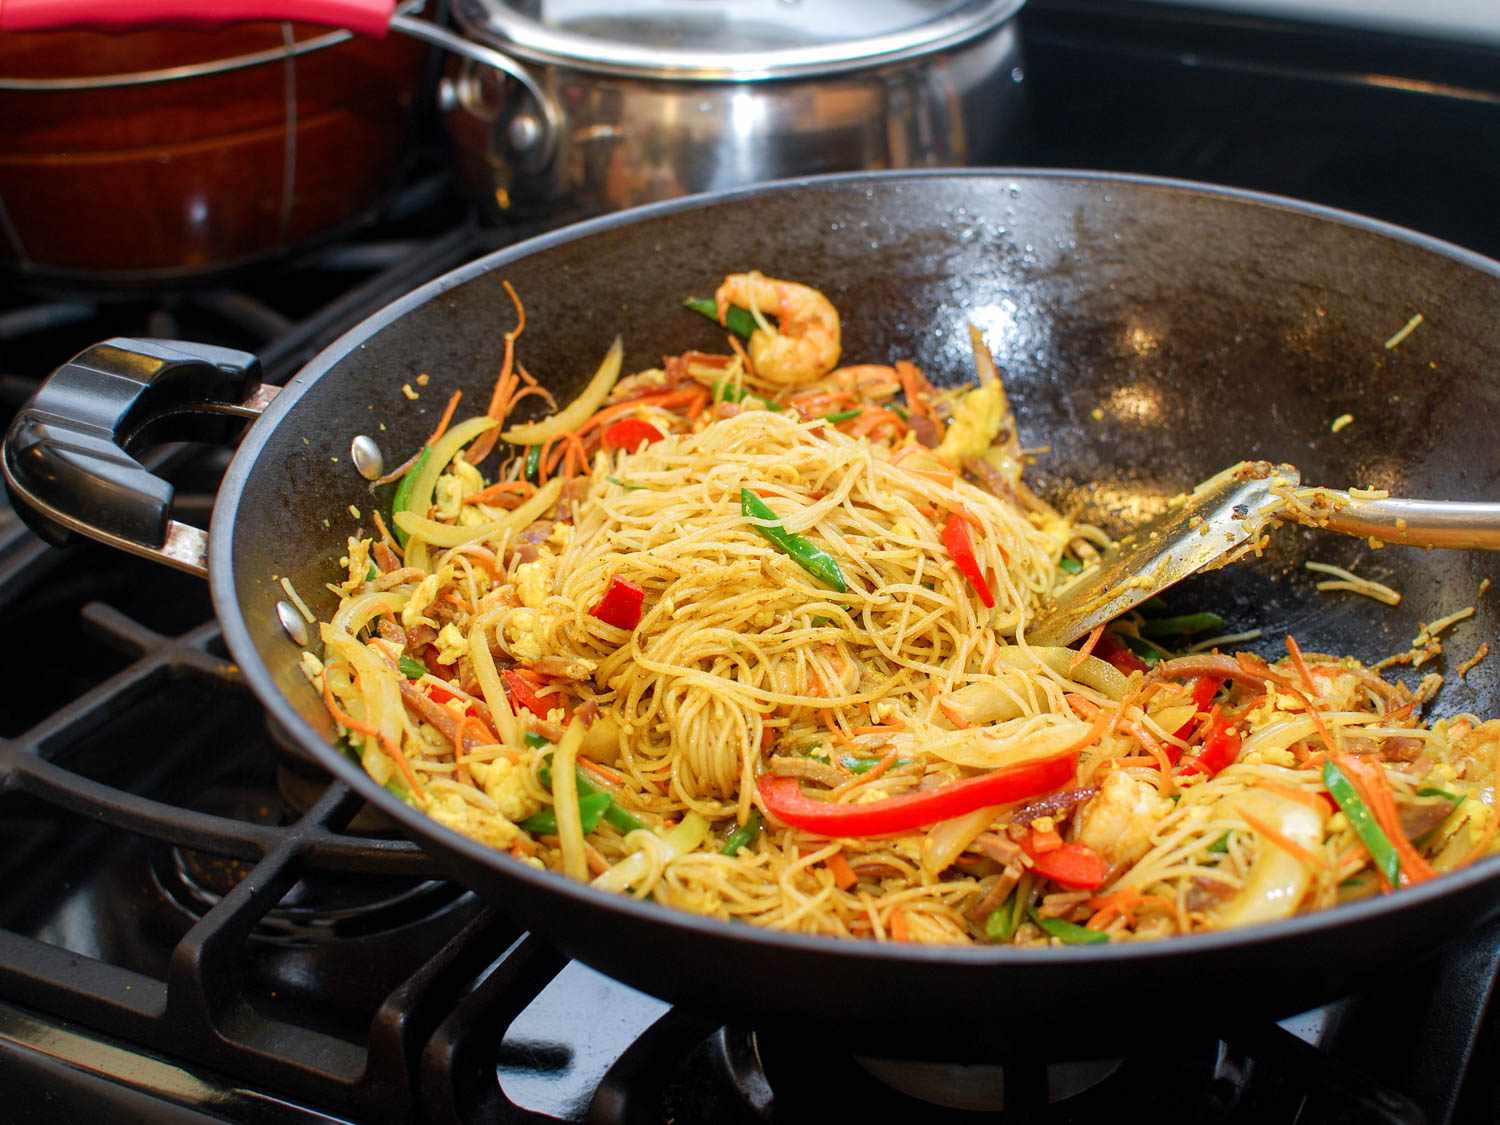 Spatula combining egg, meat, vegetables, and curried vermicelli noodles in a hot wok.